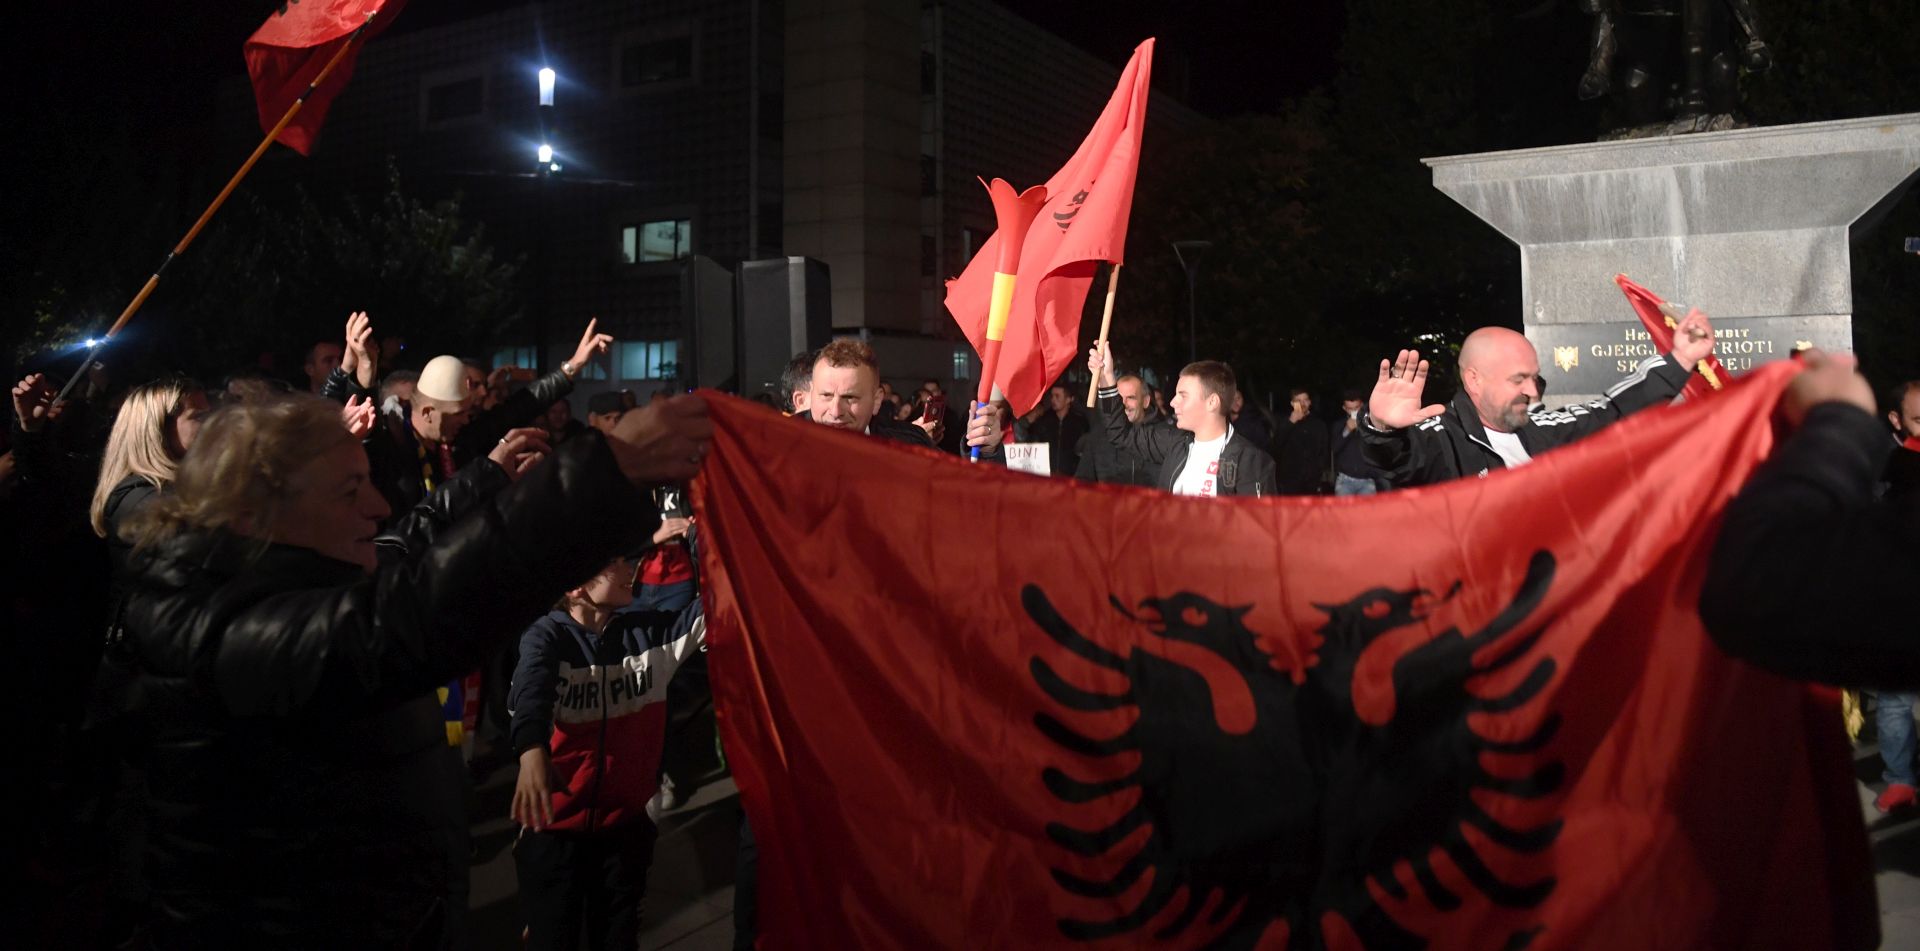 epa07902482 Supporters of Albin Kurti, founder of the opposition party 'Selfdetermination' (Vetevendosje) celebrate after the early exit polls of the parliamentary elections in Pristina, Kosovo, 06 October 2019. About 1.9 million voters are eligible to vote for the 120 seats in Kosovo's parliament, 20 of which are reserved for ethnic Serbs and other minorities. Elections have been called in August 2019 after Prime Minister Ramush Haradinaj resigned as Kosovo's prime minister after a war crimes court in The Hague summoned him for questioning as a suspect.  EPA/GEORGI LICOVSKI